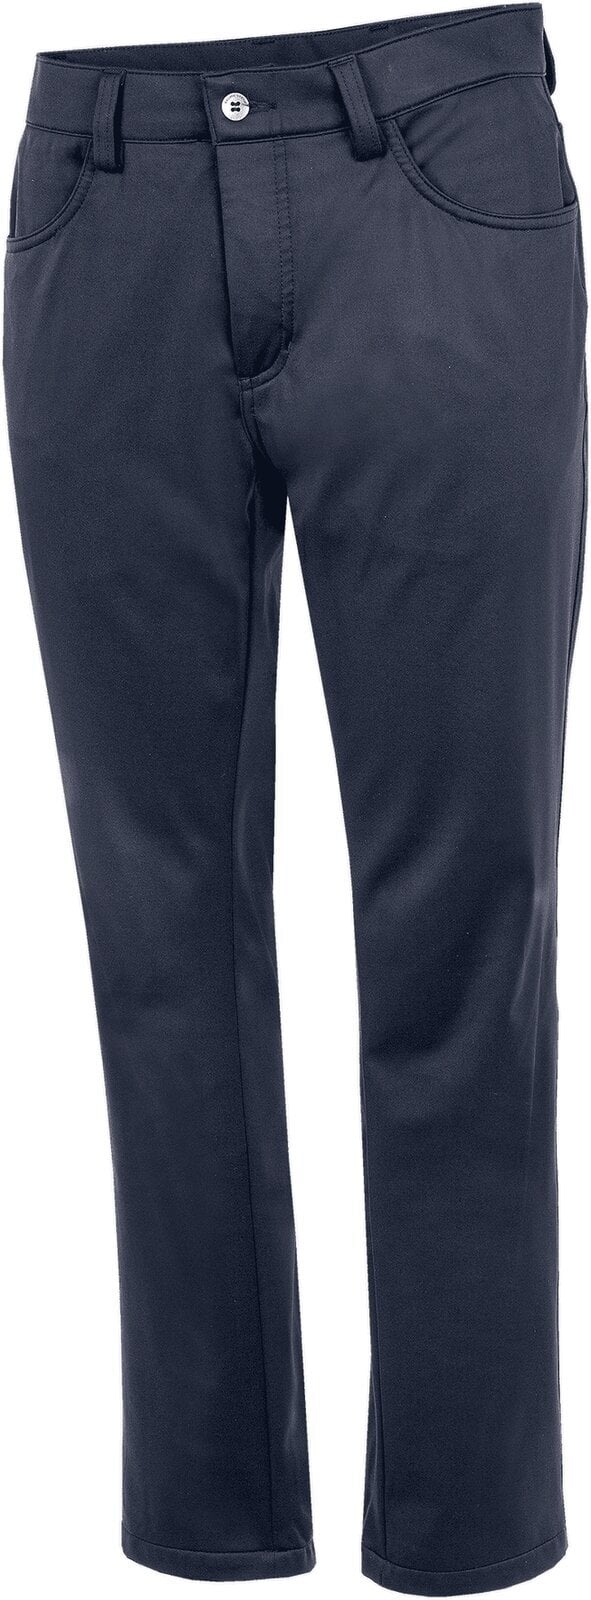 Kalhoty Galvin Green Lane MensWindproof And Water Repellent Pants Navy 38/32